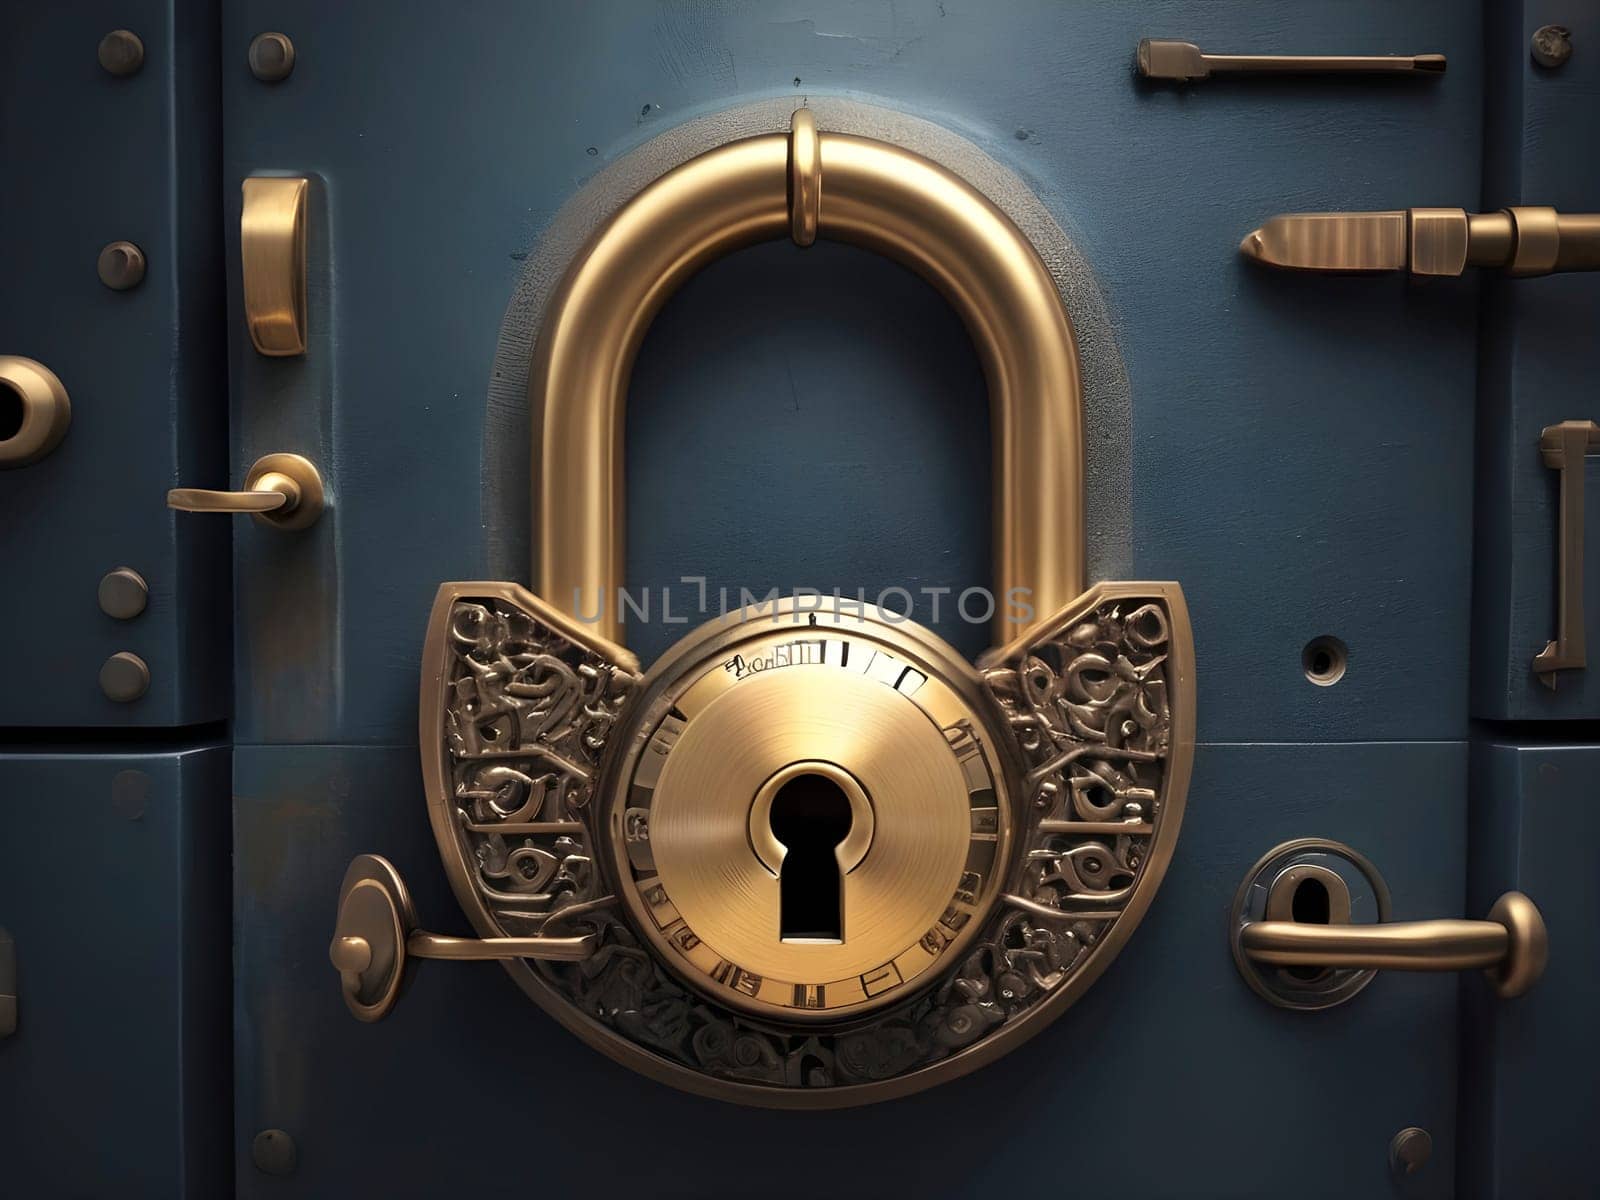 Data Fortress. The Art of Encryption in Lock and Key Imagery by mailos